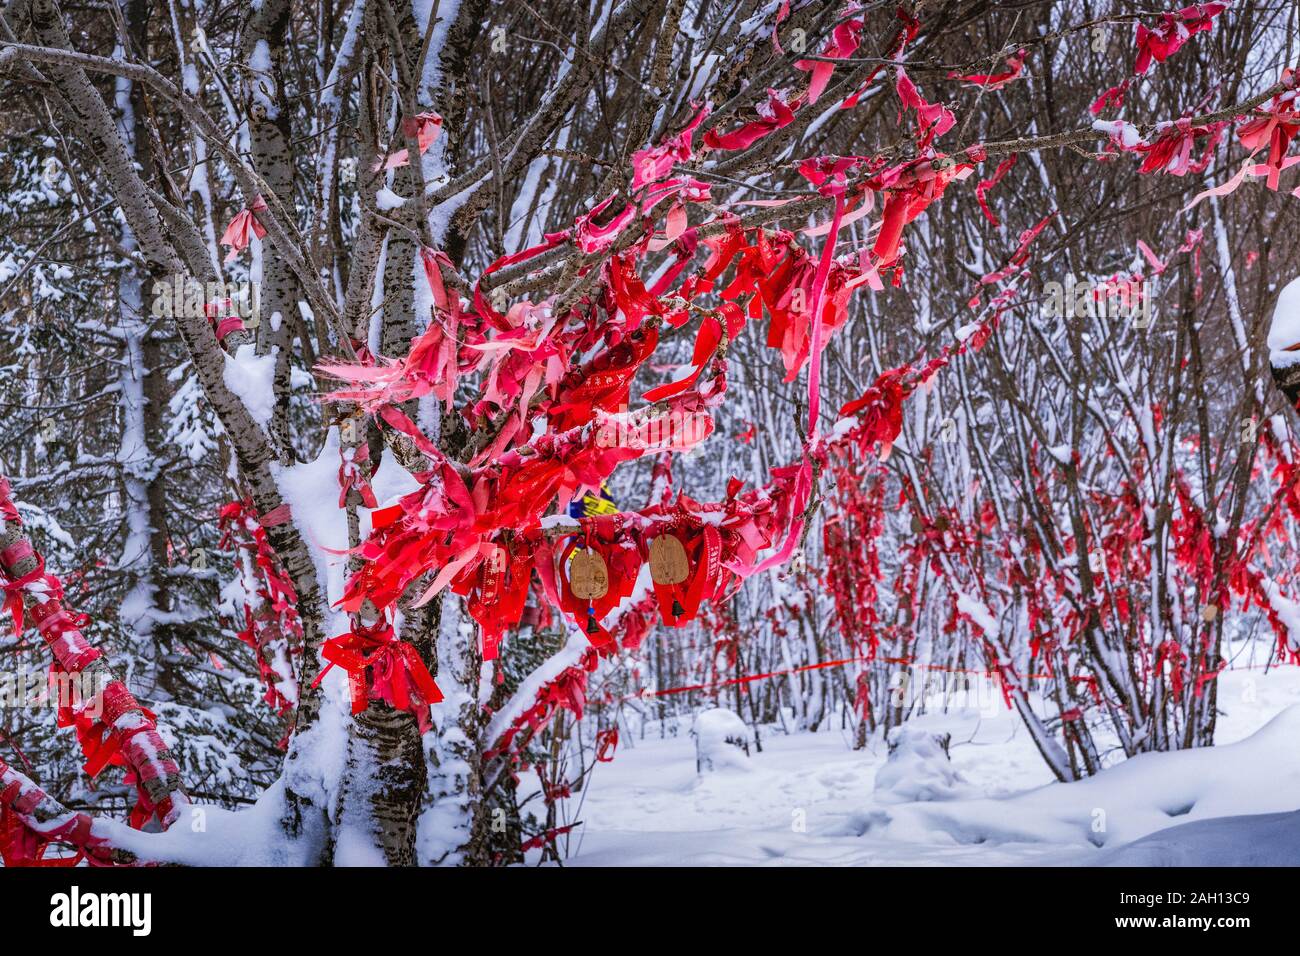 Red Ribbons Of Good Luck Tied To The Tree Branches That Are Covered In Snow And Frost In The Wooded Forest During Winter In 19 Stock Photo Alamy